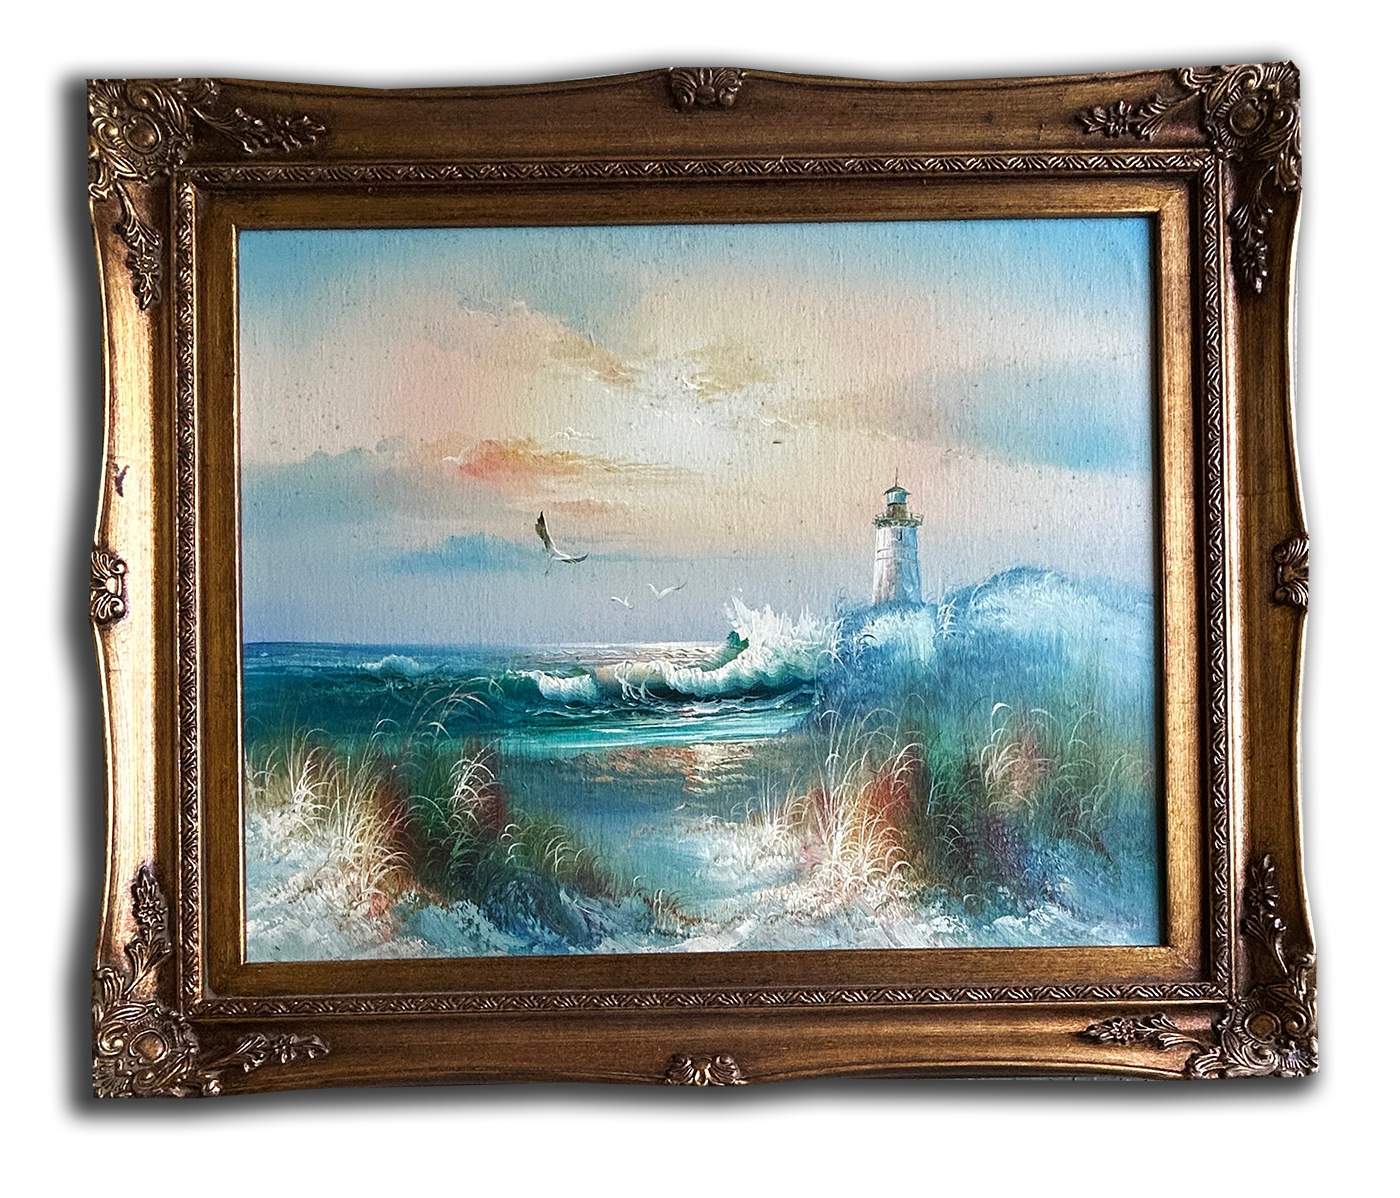 The sea and light house, hand-painted oil painting, 54x64 cm or 21x25 ins